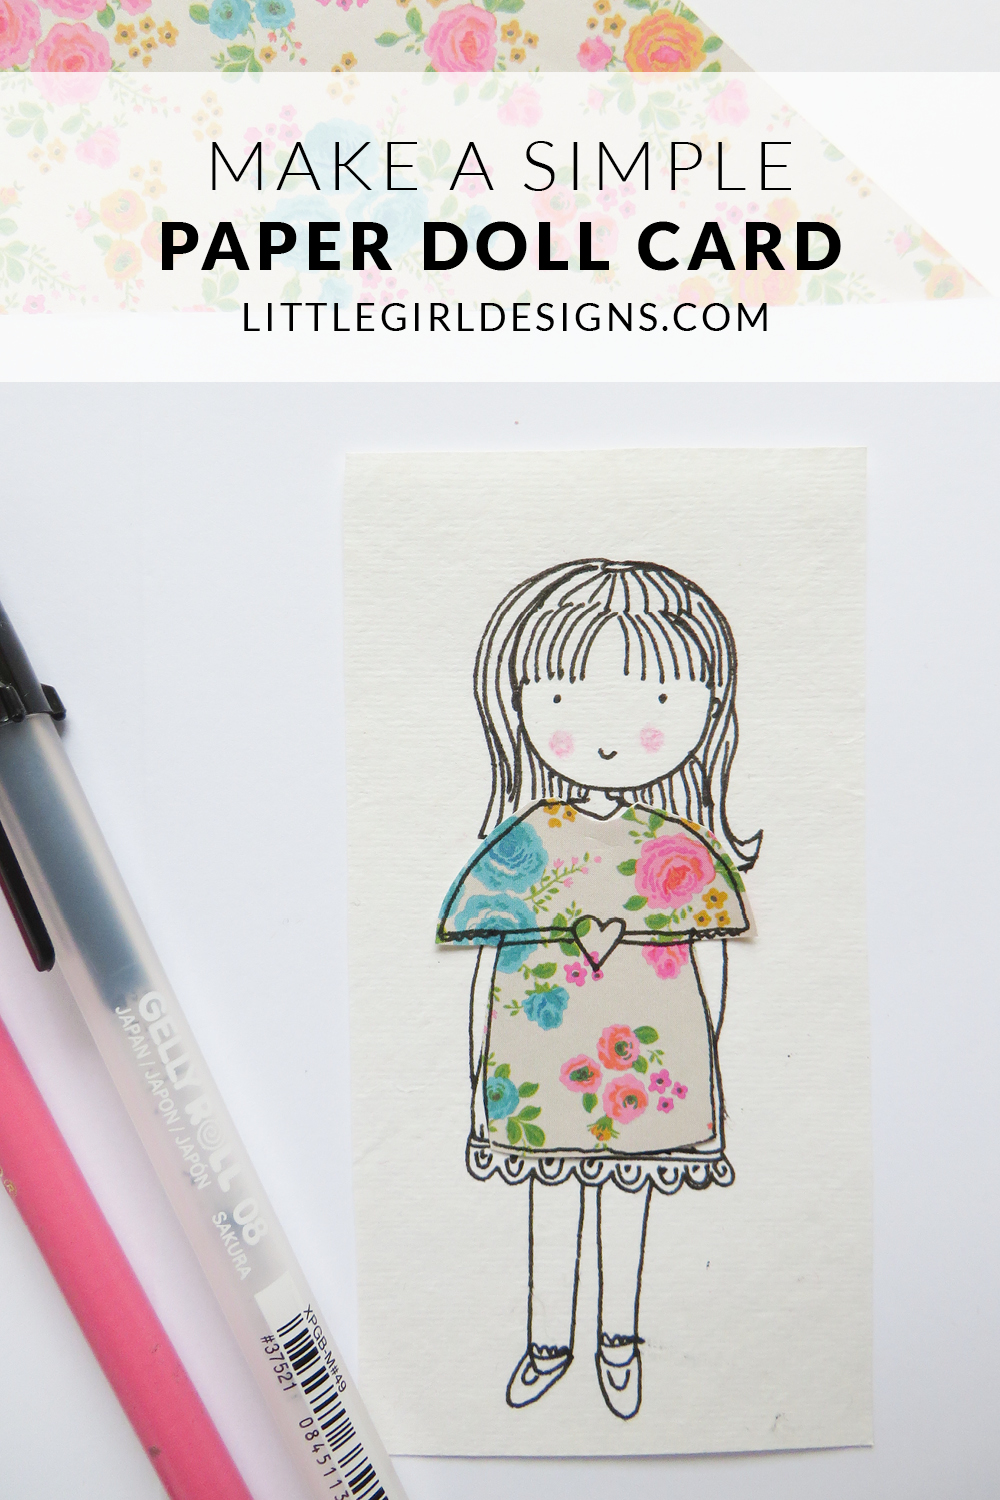 How to Make a Paper Doll Card